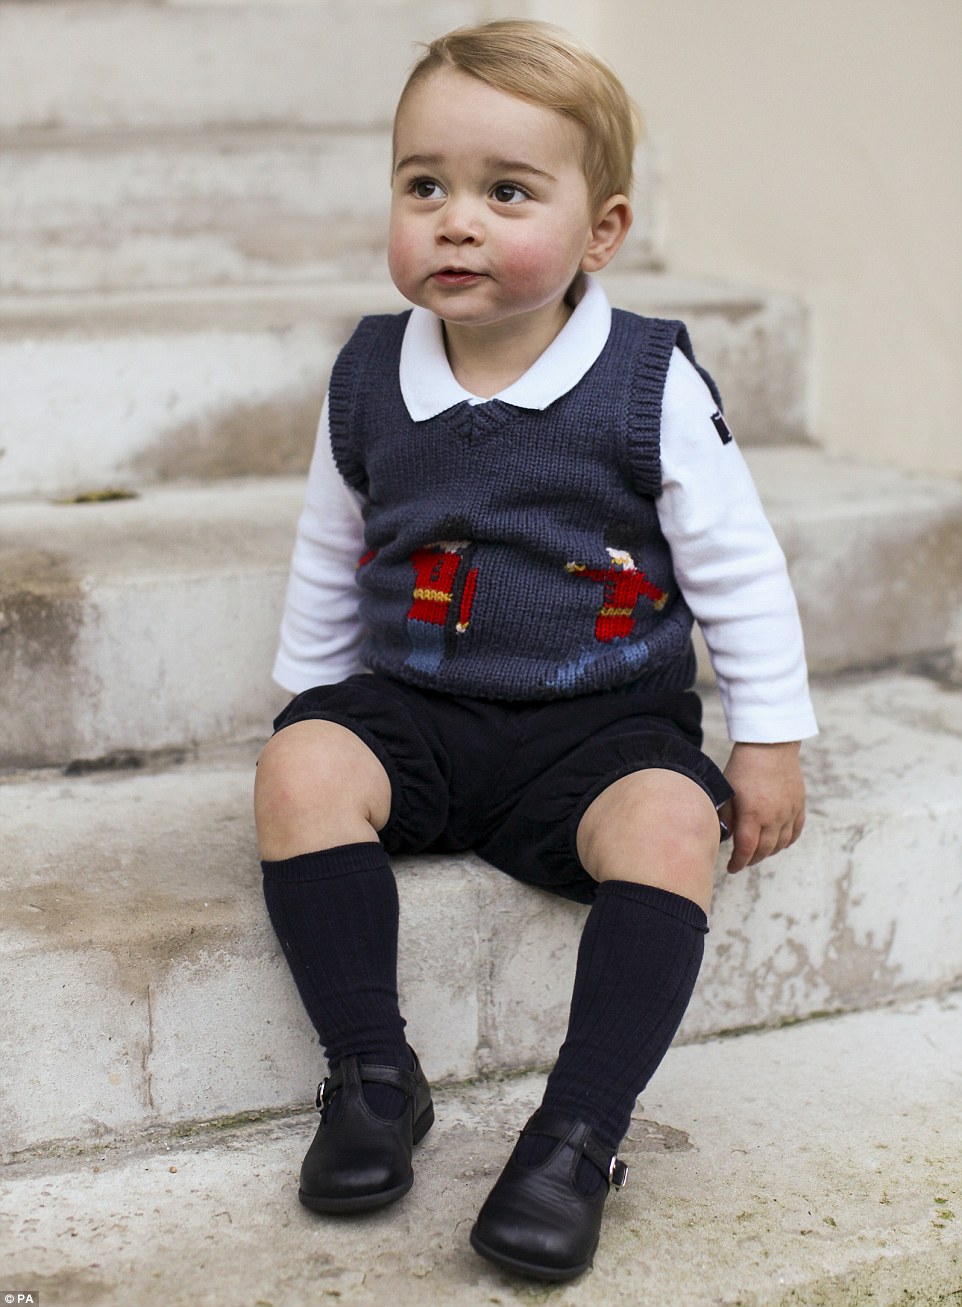 2407BDD800000578-0-Prince_George_dressed_in_an_adorable_jumper_in_a_picture_that_wa-a-31_1418499317923